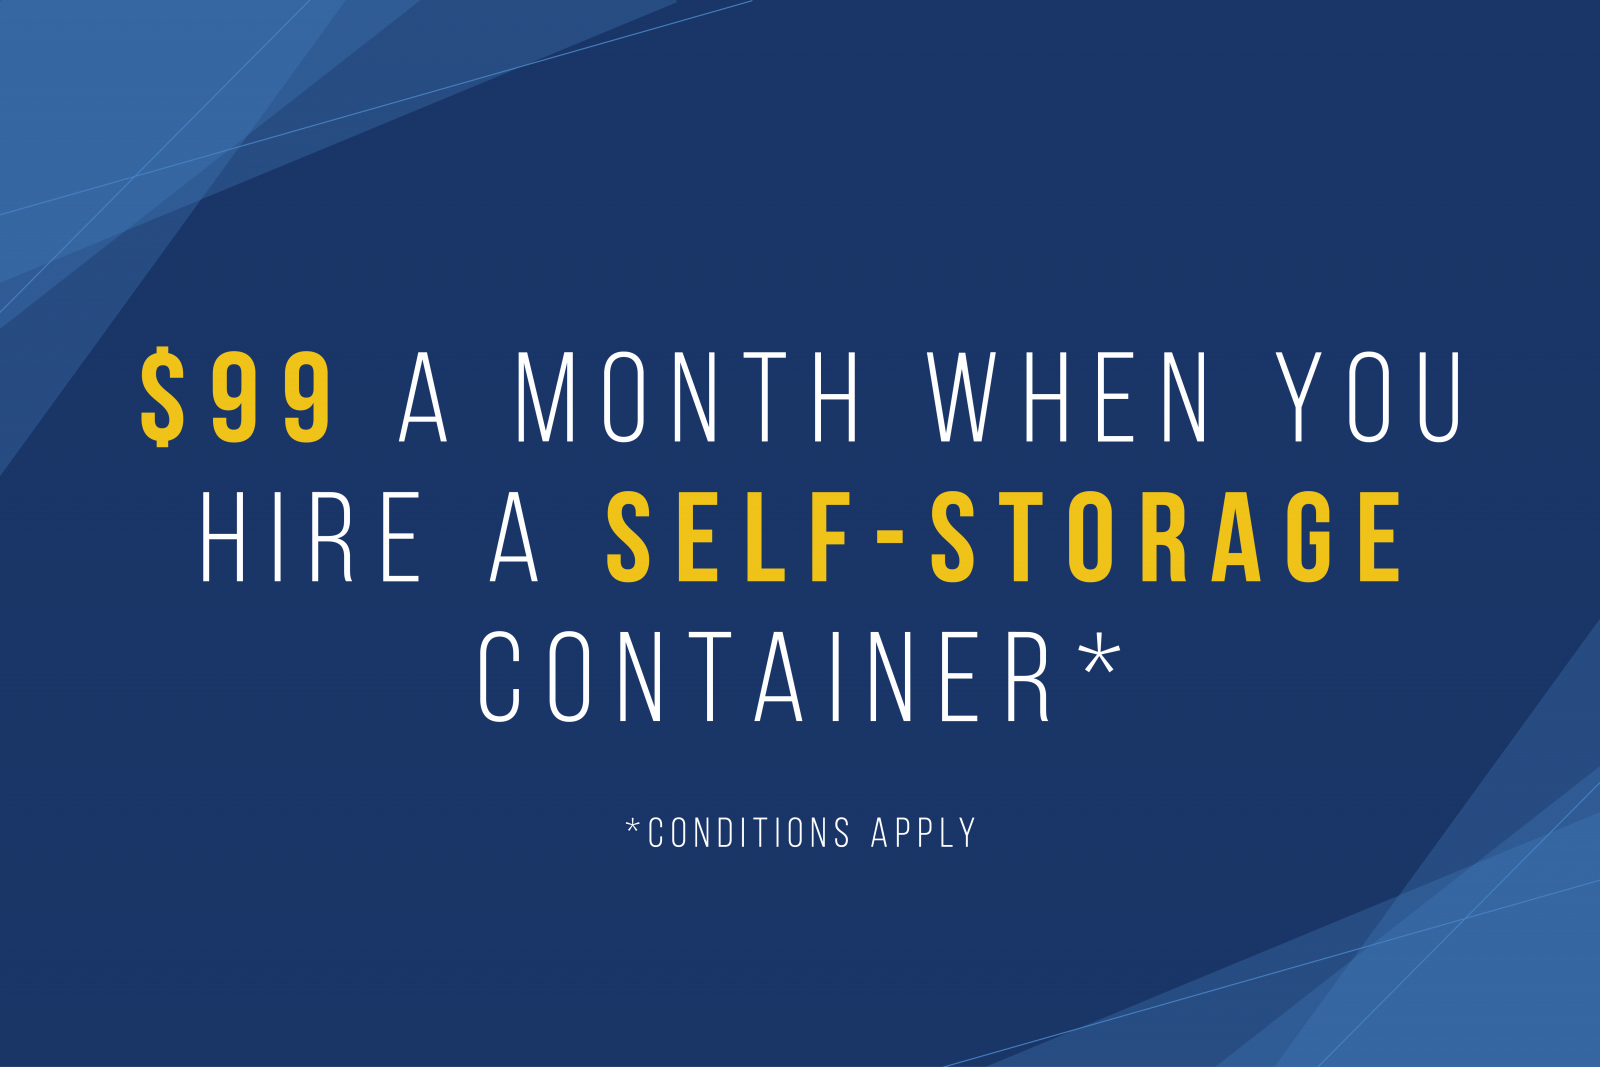 $99 a month when you hire a self storage container. Conditions apply.